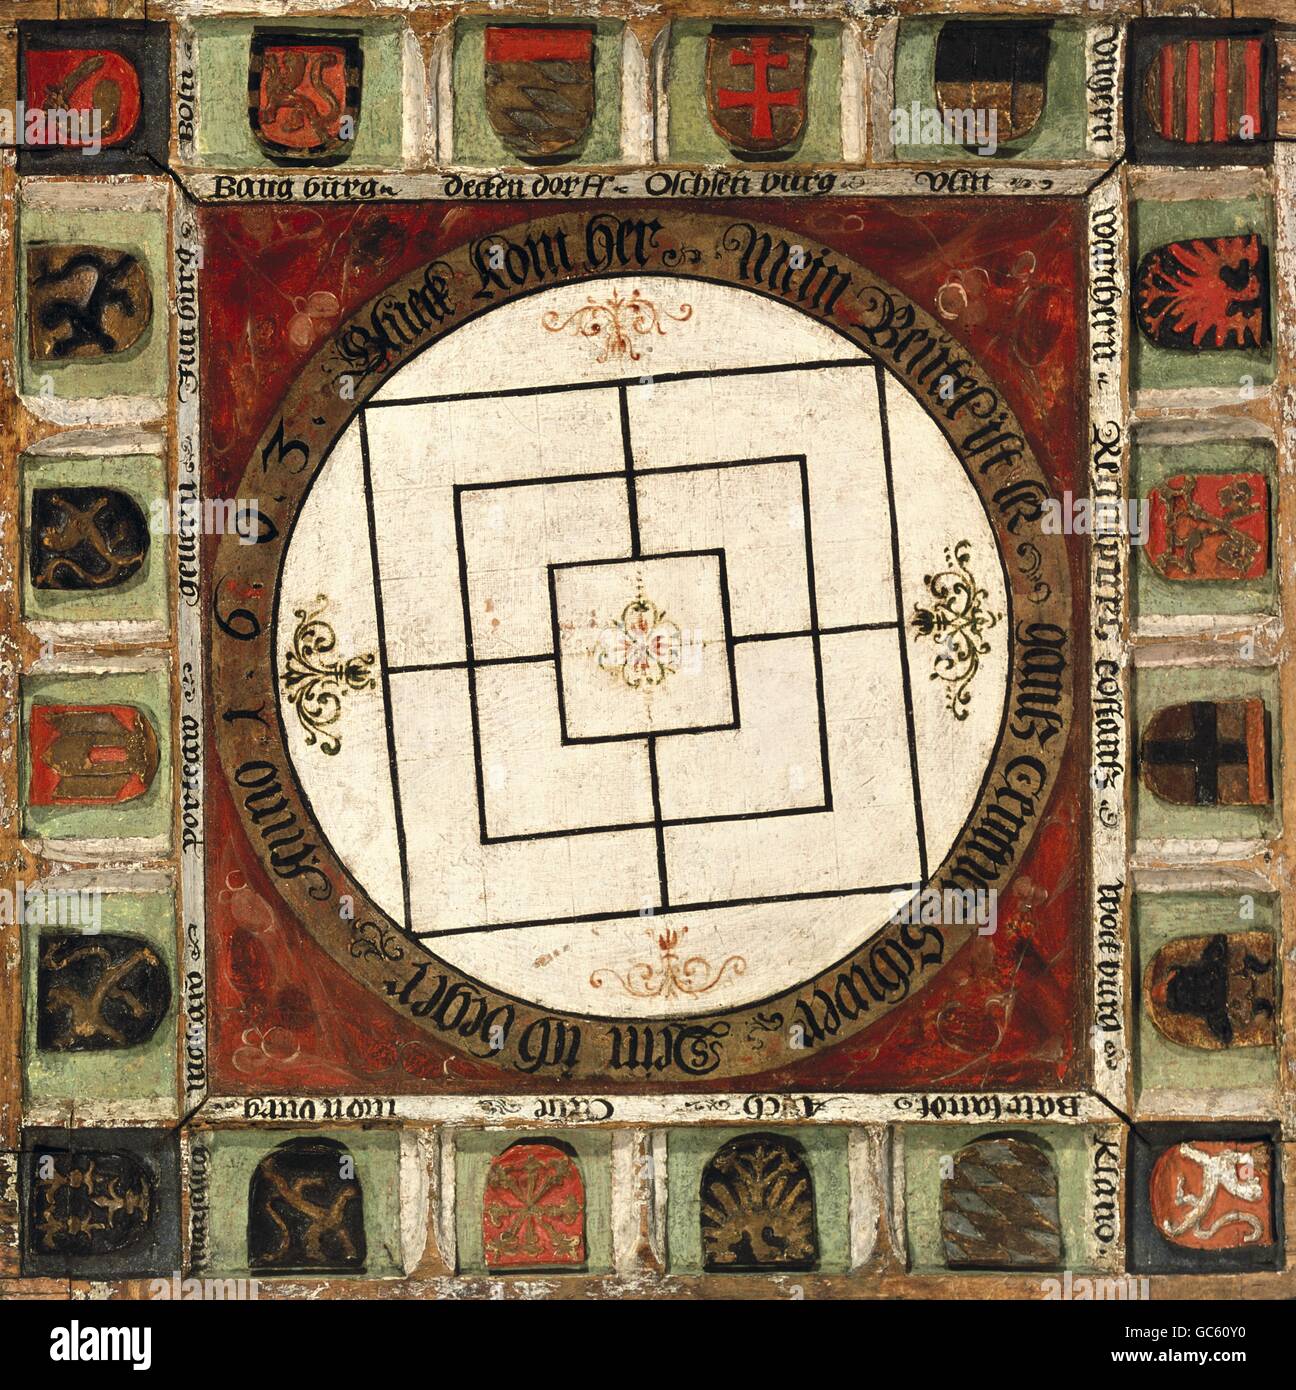 game, board games, Nine Men's Morris, gameboard, wood, South Germany, circa 1500, painting cira 1603, Bavarian National Museum, Munich, coat of arms, middle ages, 15th/16th century, historic, historical, medieval, Additional-Rights-Clearences-Not Available Stock Photo